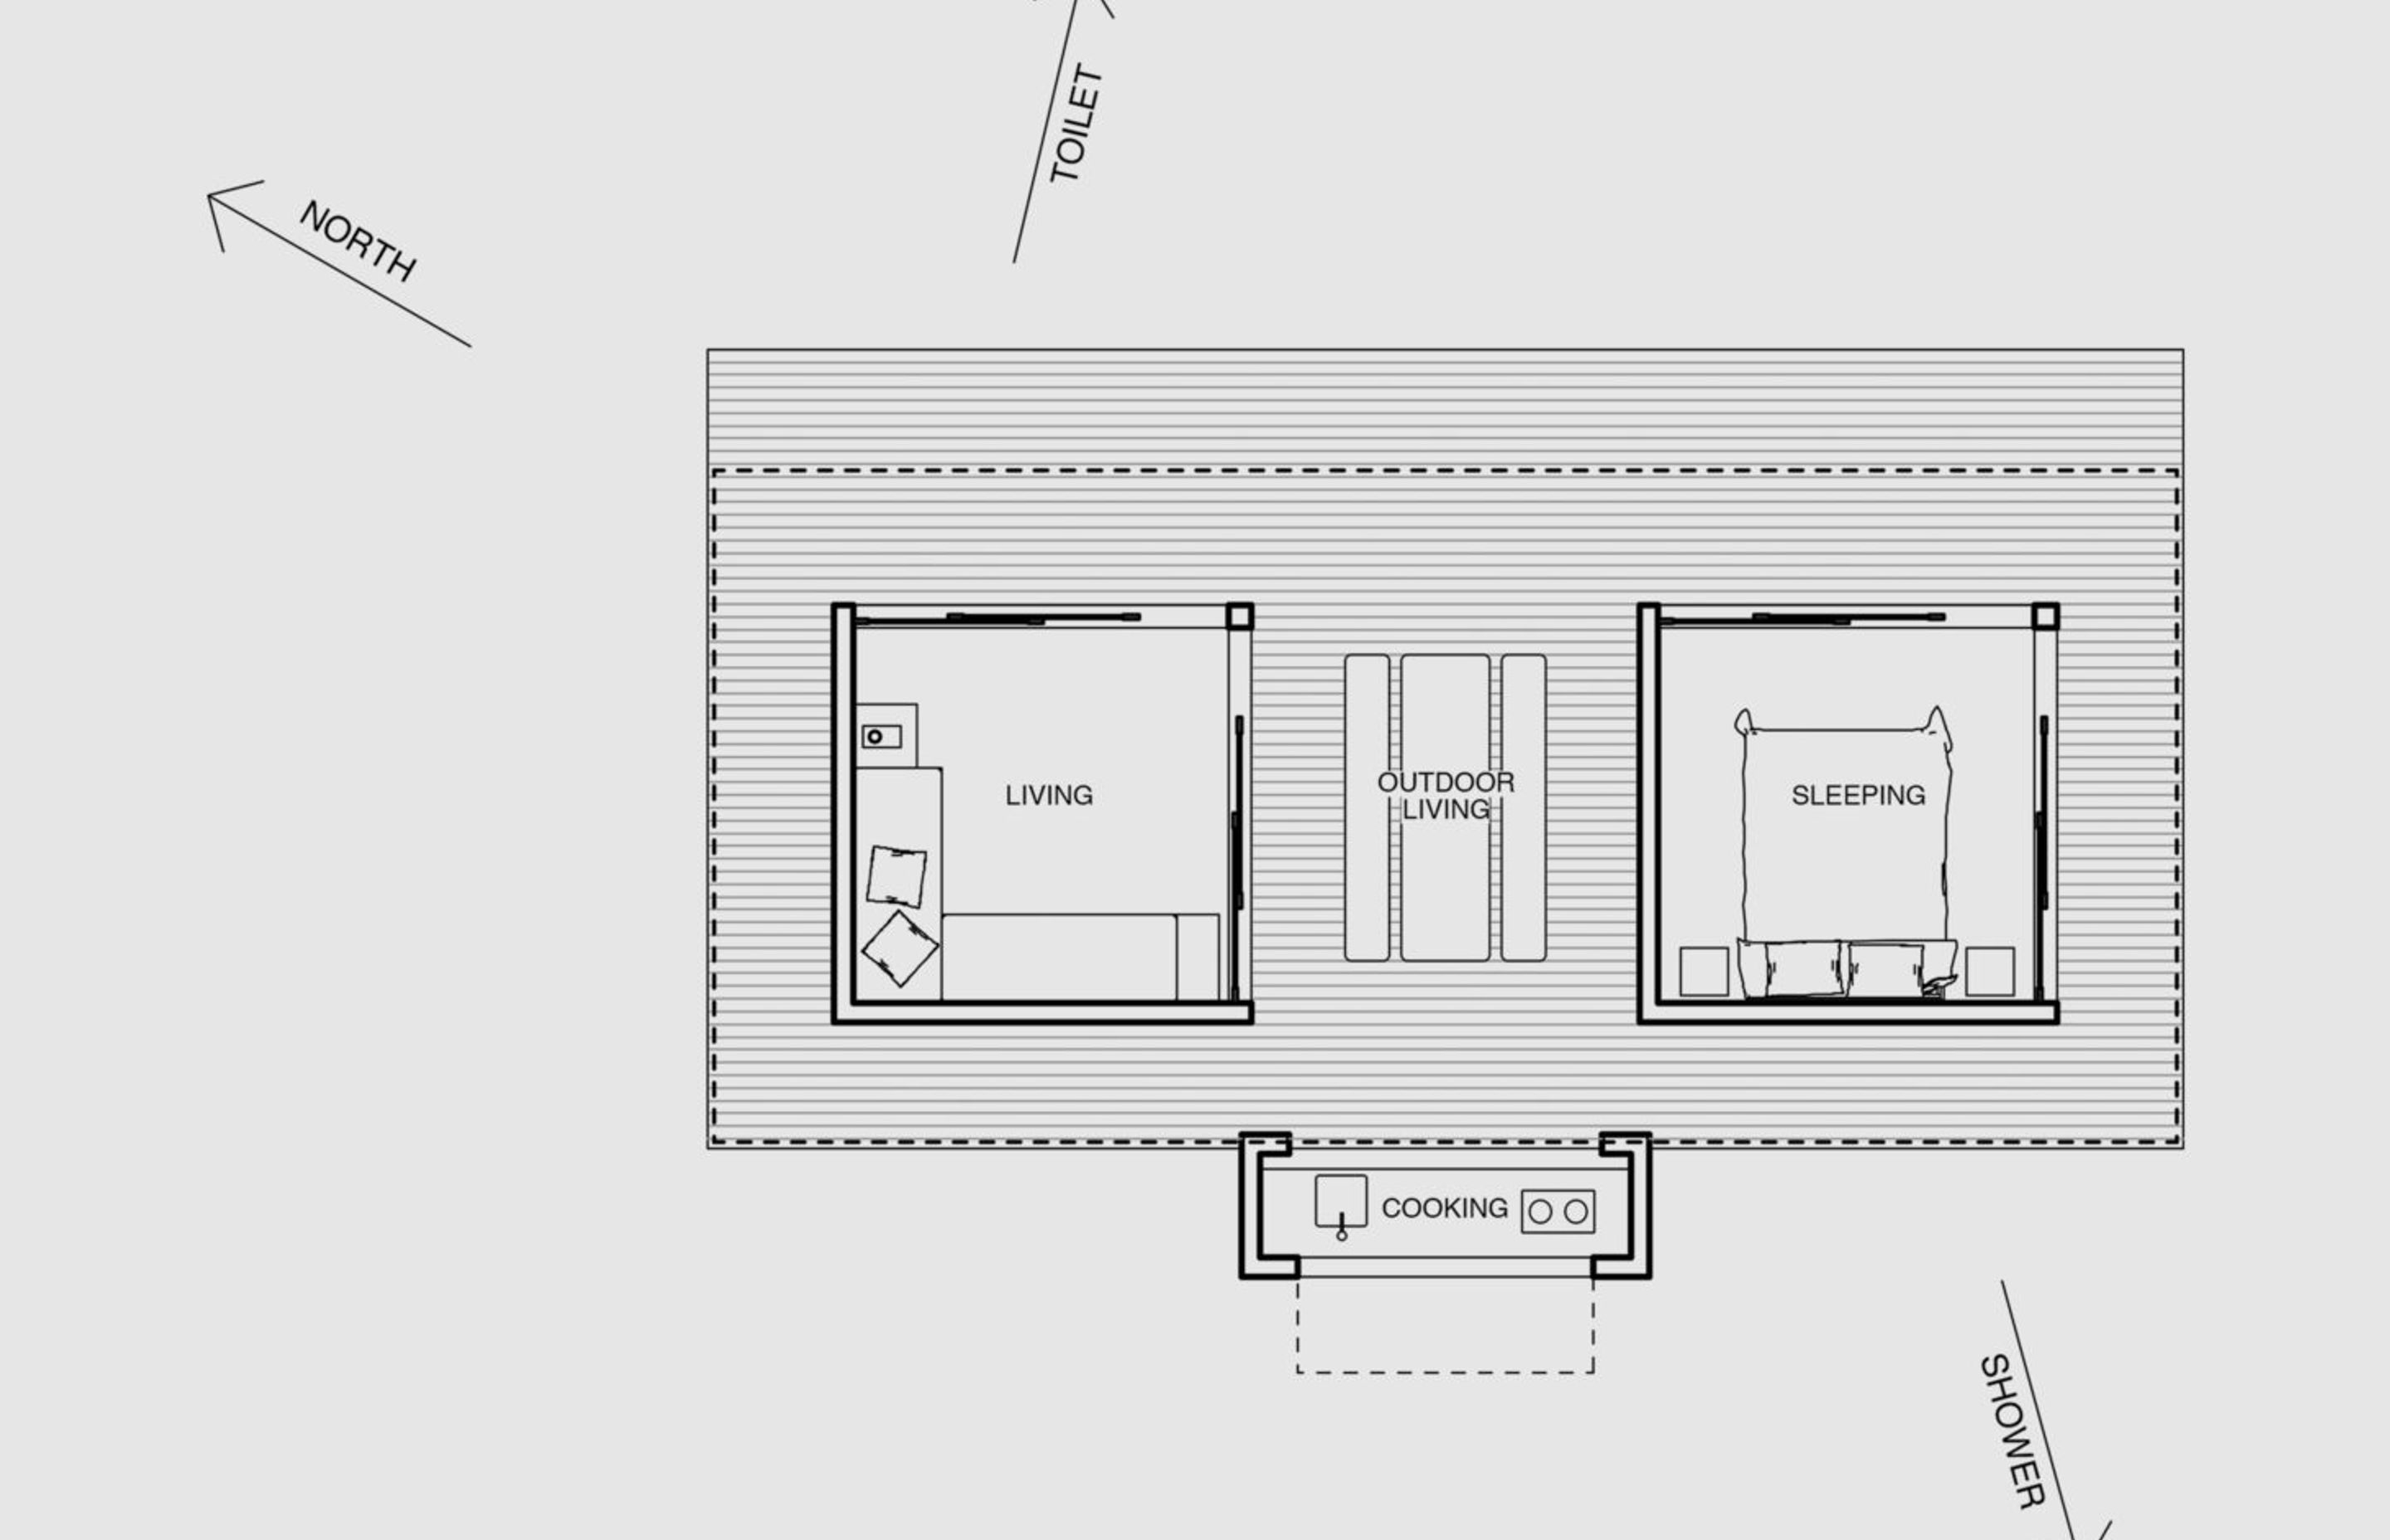 Floor plan by Patchwork Architecture.